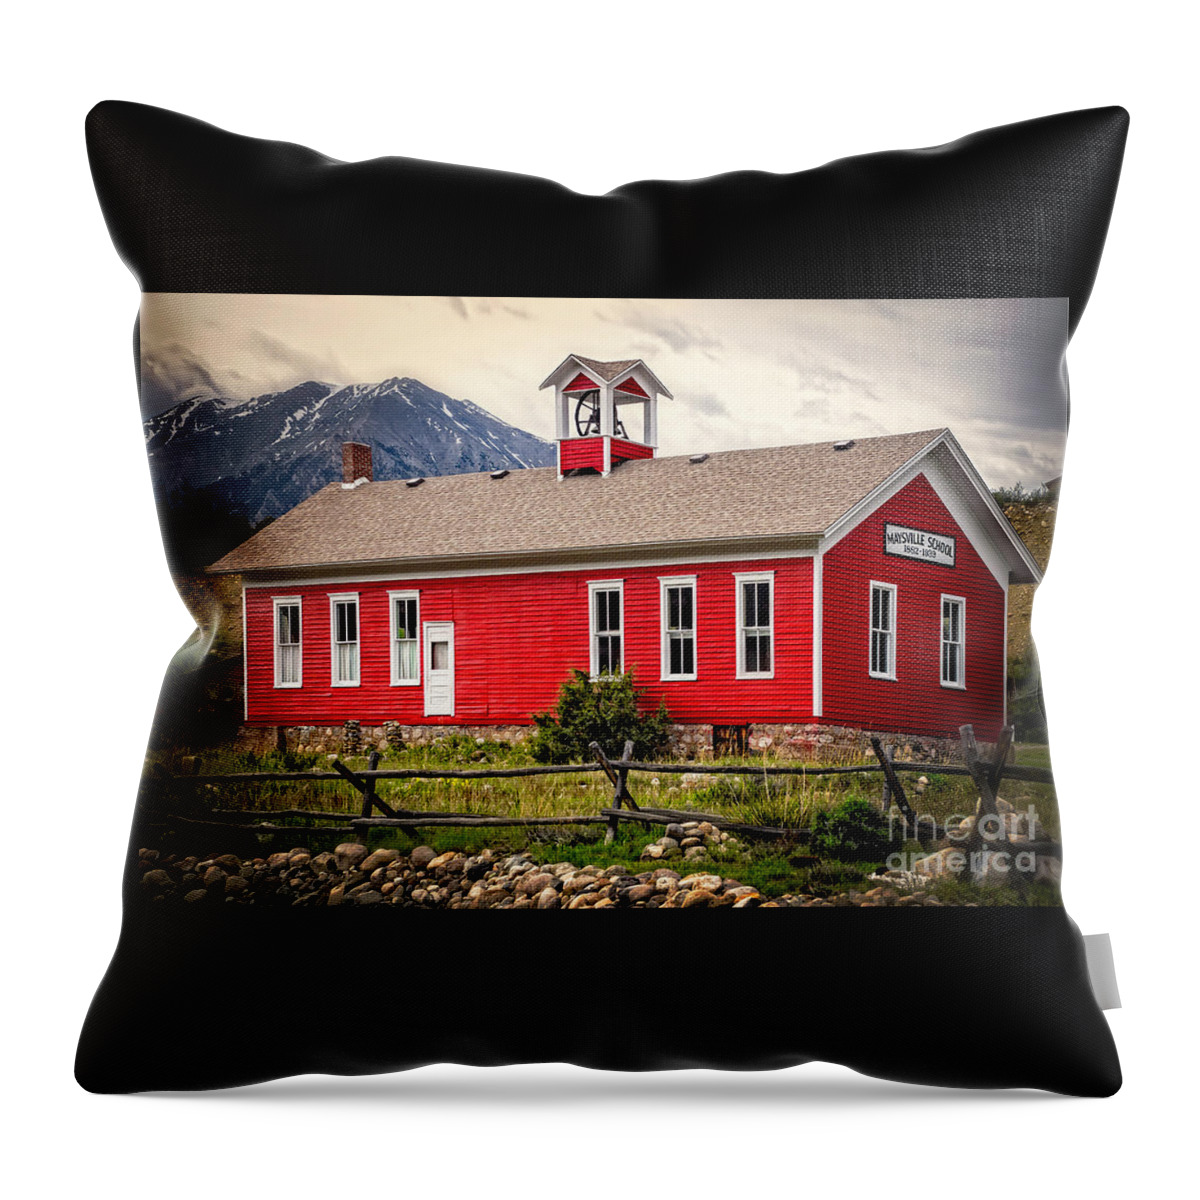 Maysville School Throw Pillow featuring the photograph Maysville School 1882 - 1939 by Imagery by Charly